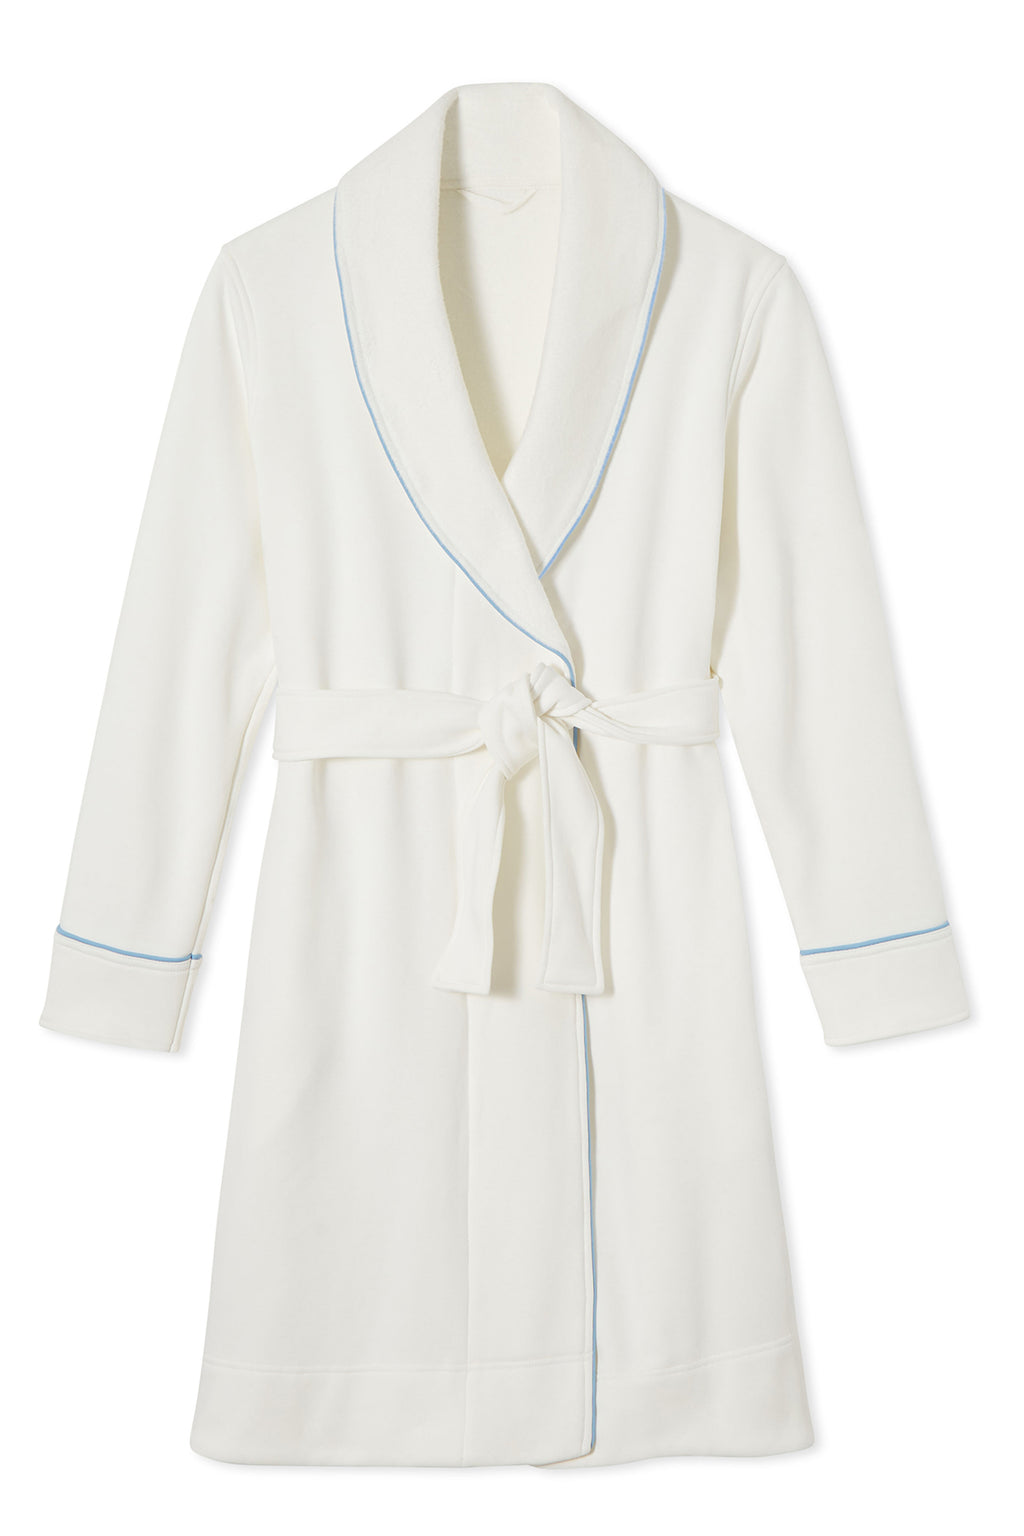 Carter Robe in French Blue